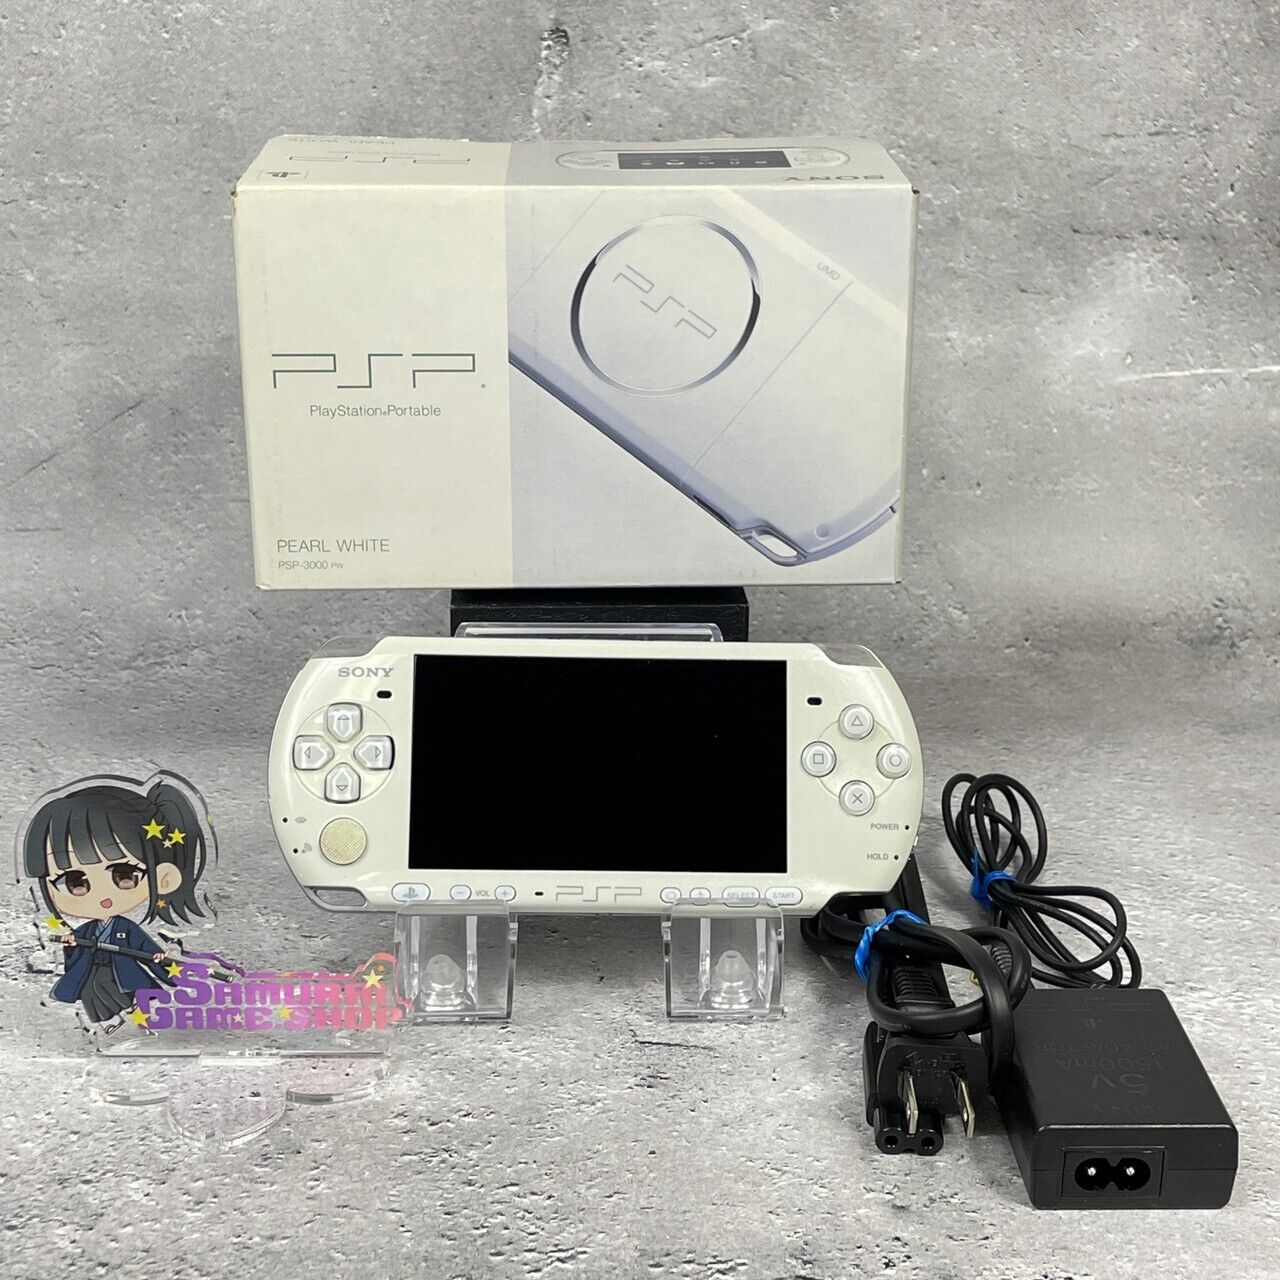 PSP 3000 SONY Playstation Portable Console Accessory Complete Box set Used Japan